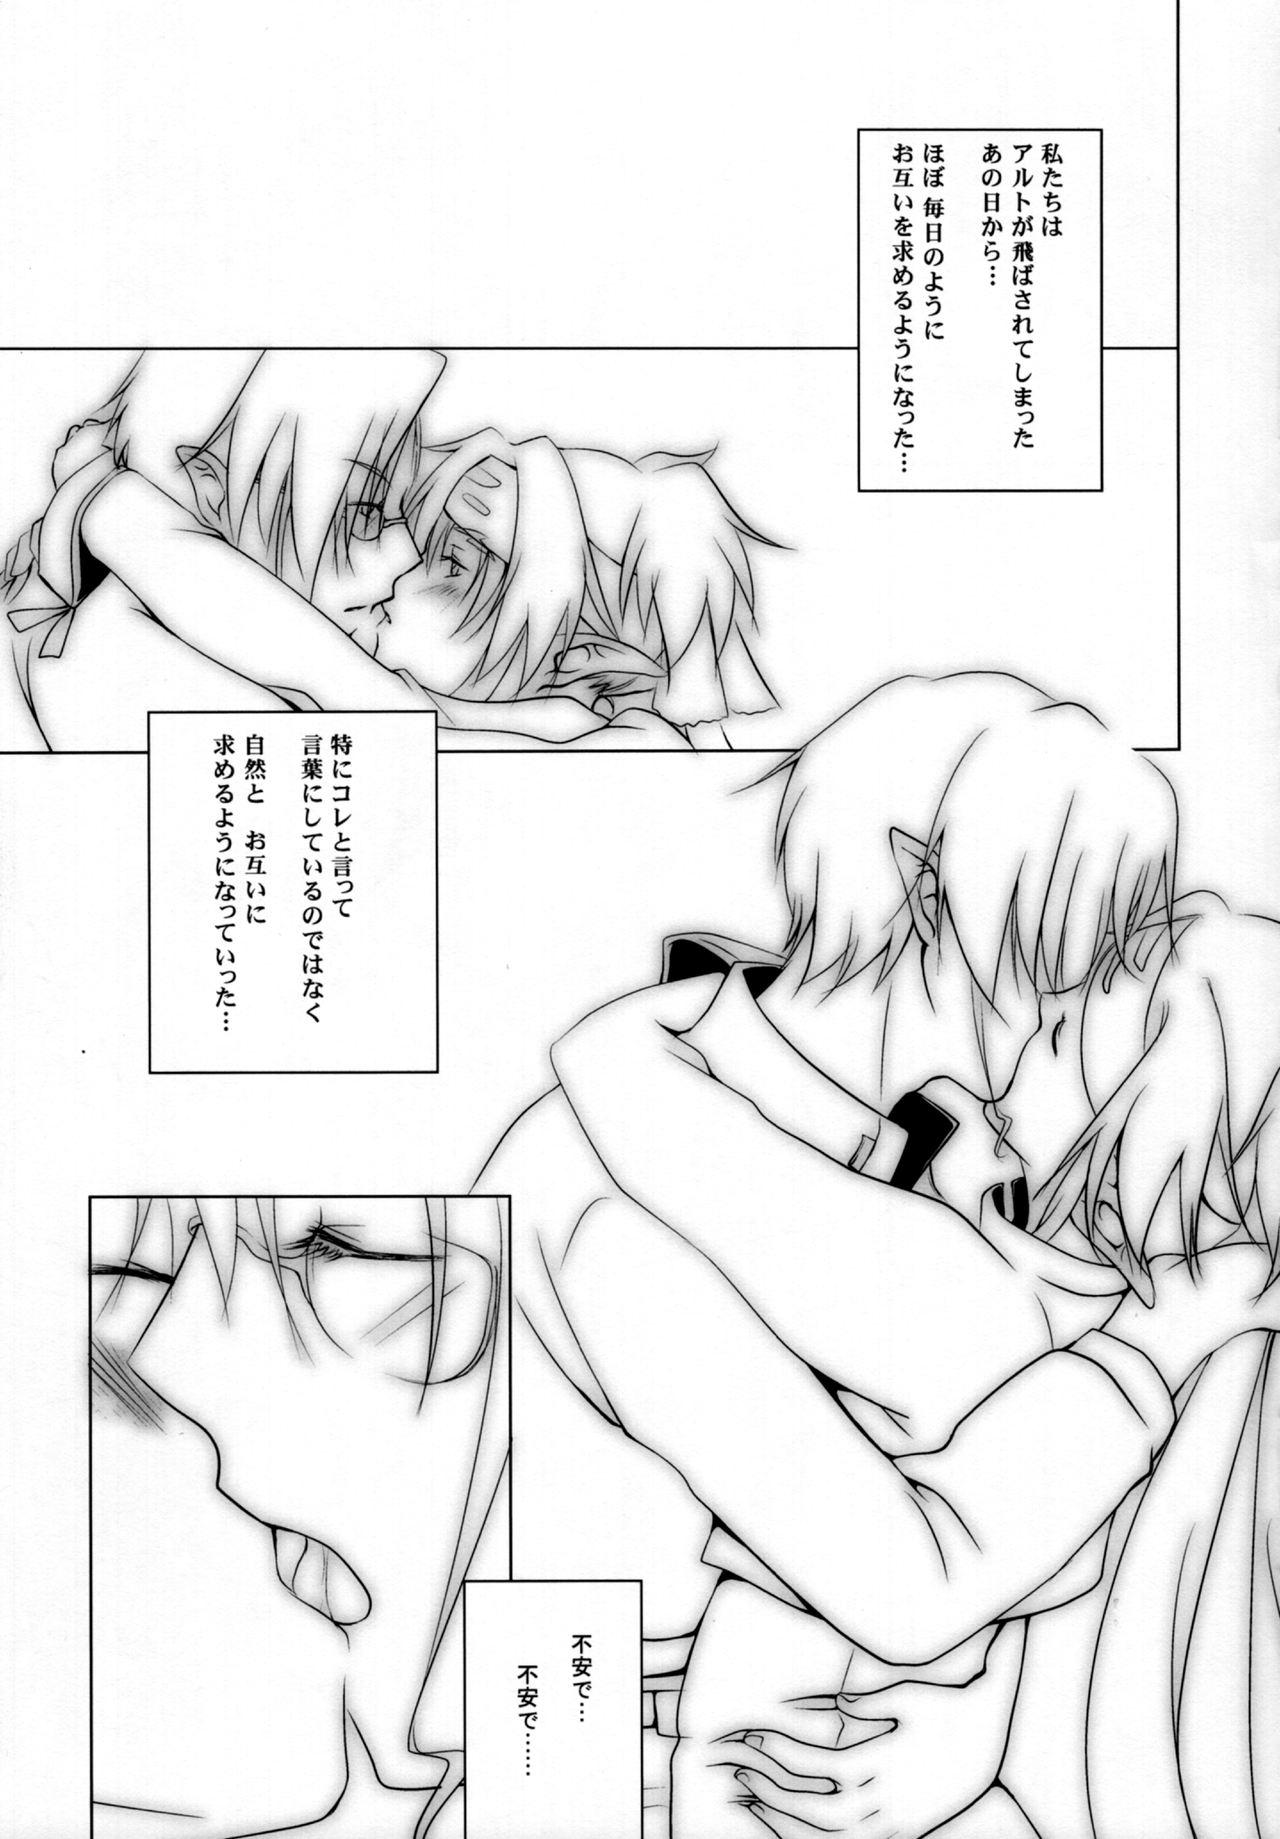 Hidden Ever moment with you - Macross frontier Desnuda - Page 2